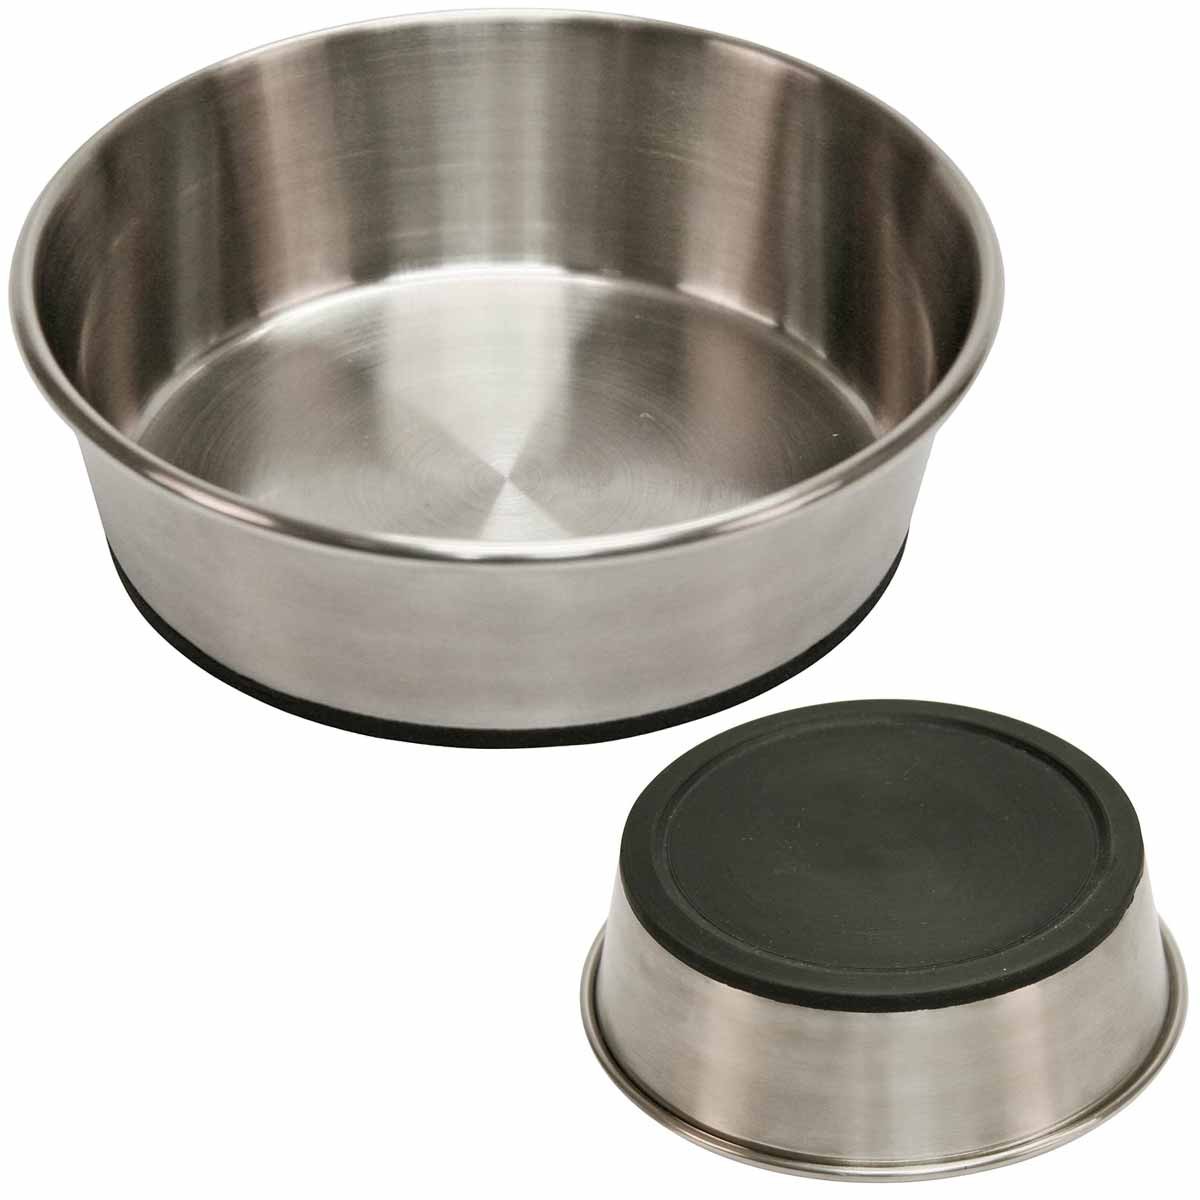 Stainless Steel Bowl 425 ml